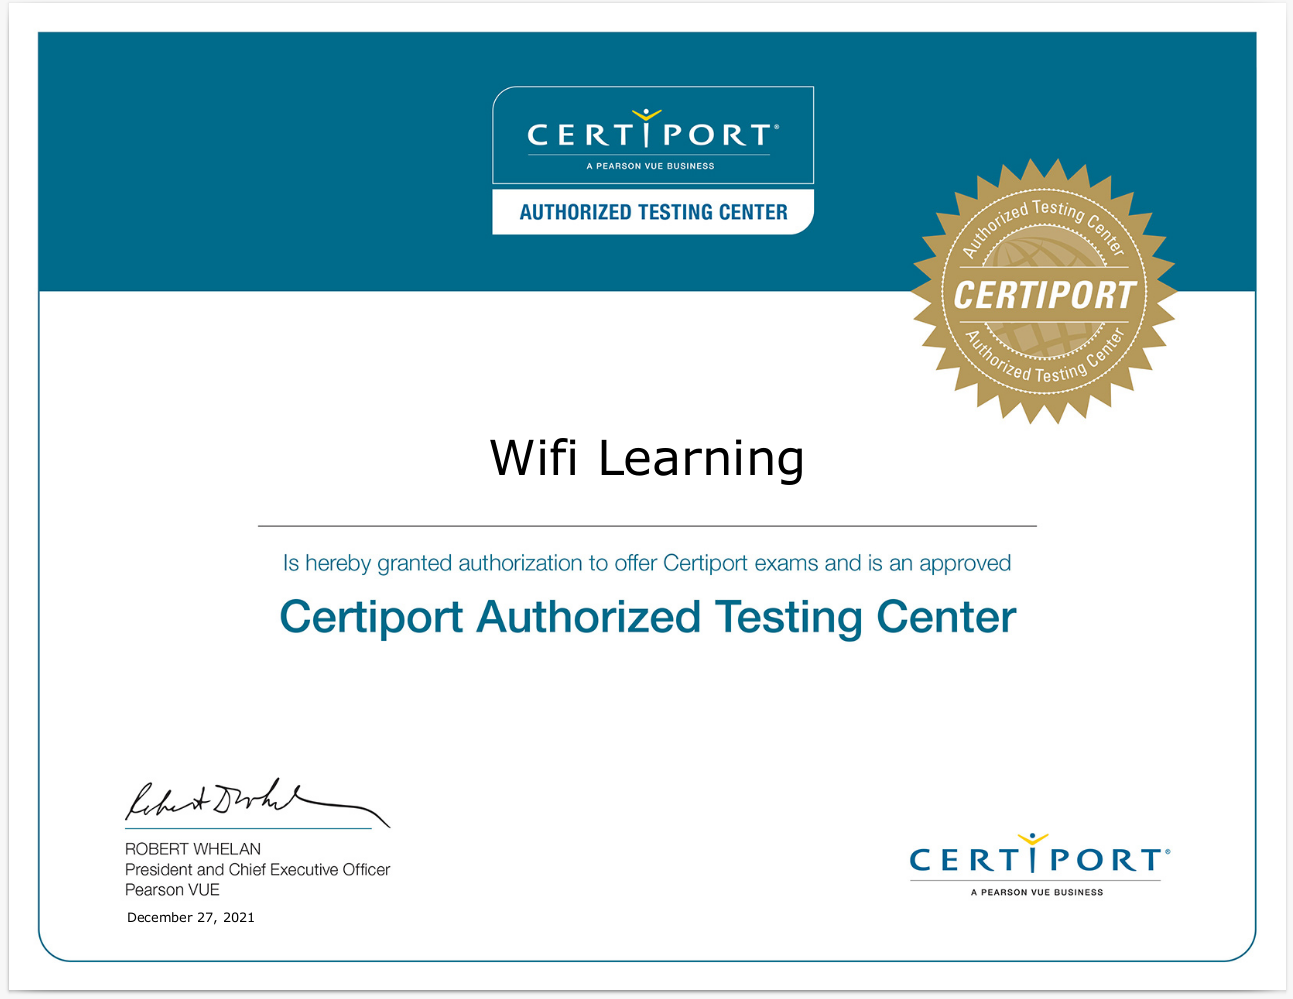 Certiport Authorized